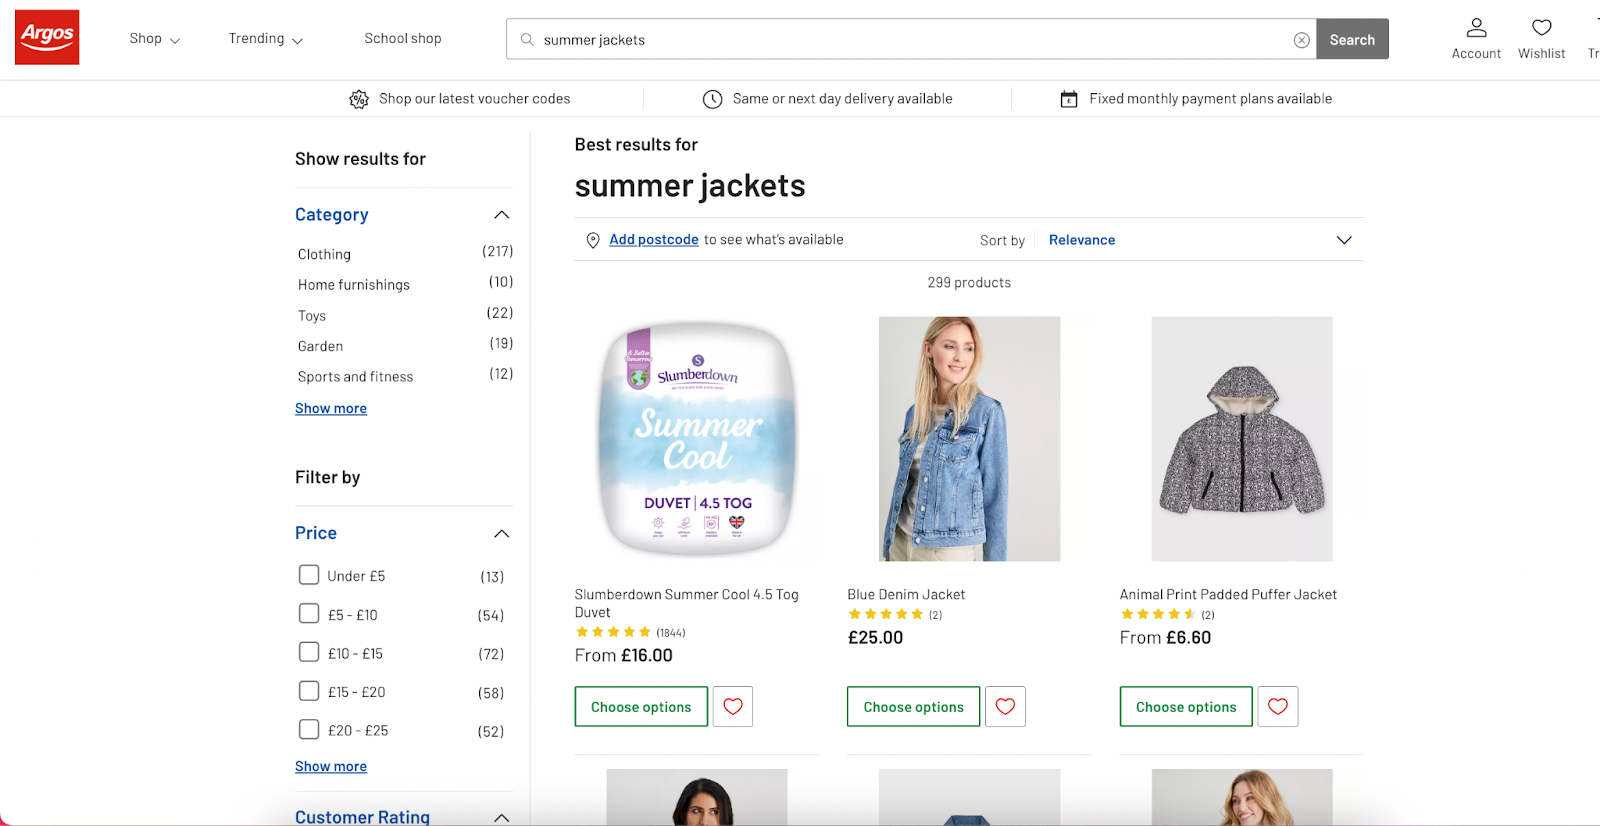 8 Best Practices to Improve Your eCommerce User Experience